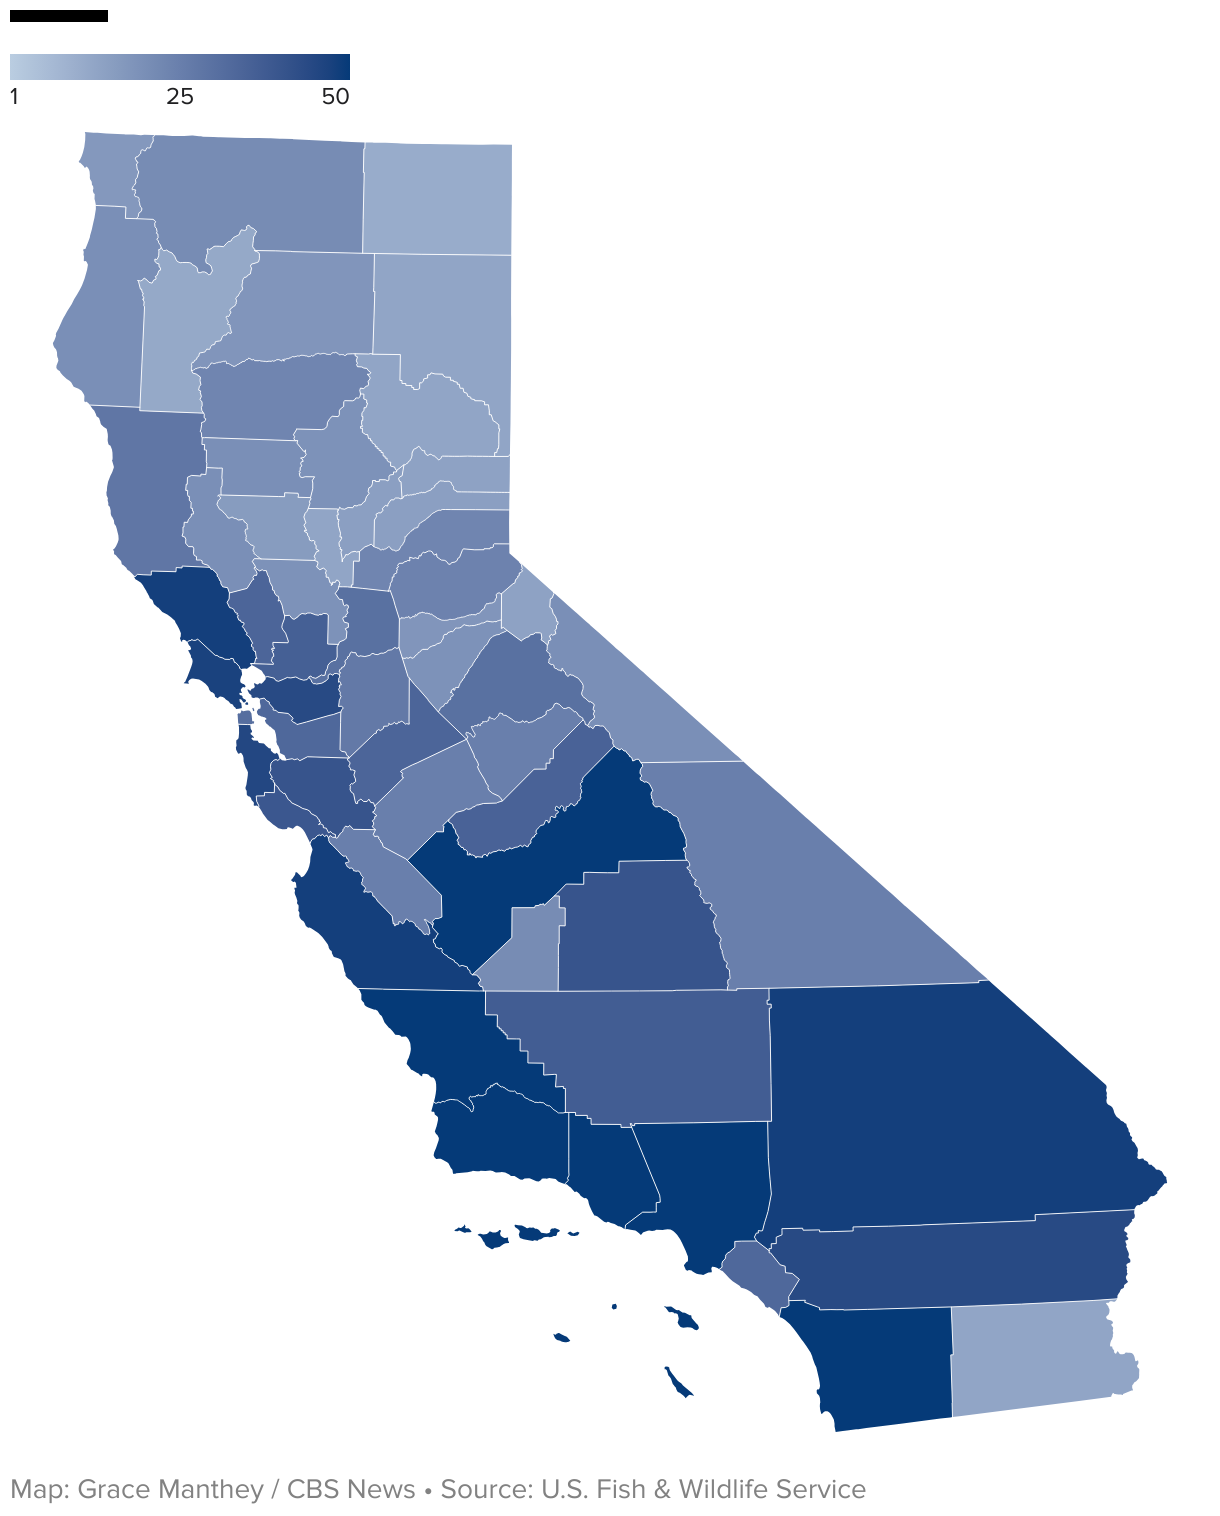 Map showing the number of threatened species at risk of extinction by county in California, colored blue. Coastal, central and Southern California have the highest numbers.